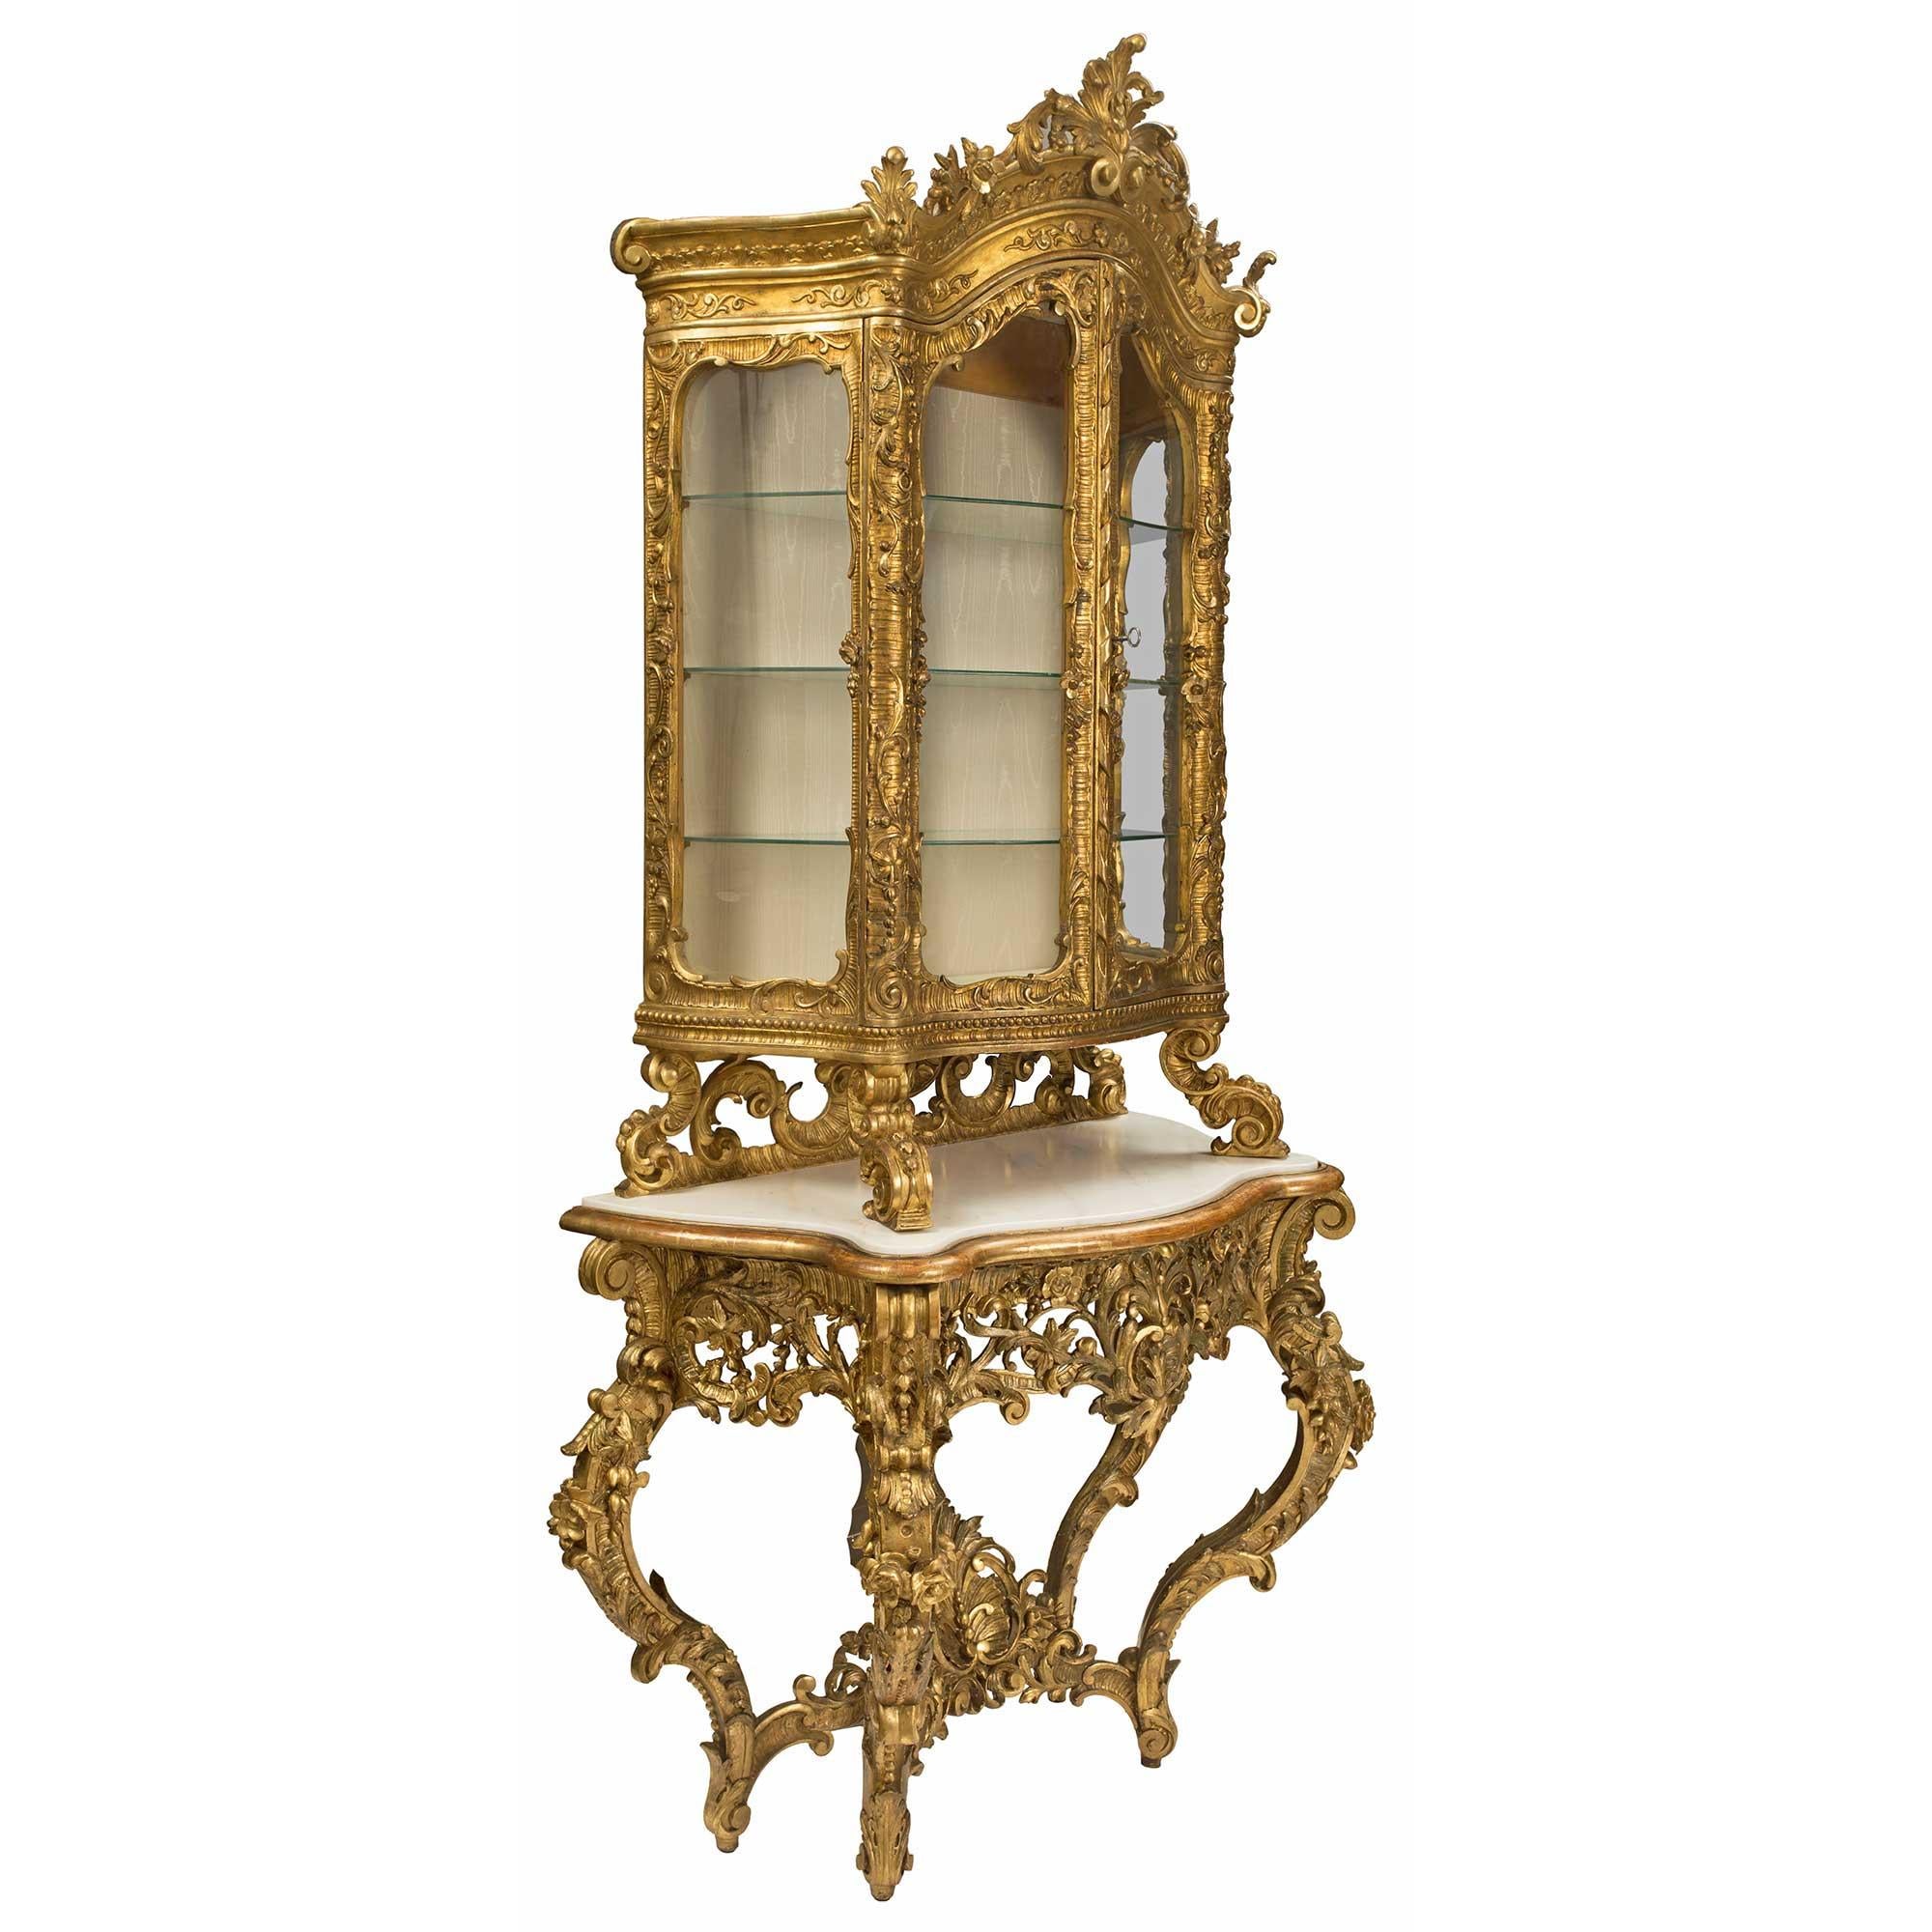 Italian 18th Century Giltwood, Polychrome and Marble Baroque Console Vitrine In Good Condition For Sale In West Palm Beach, FL